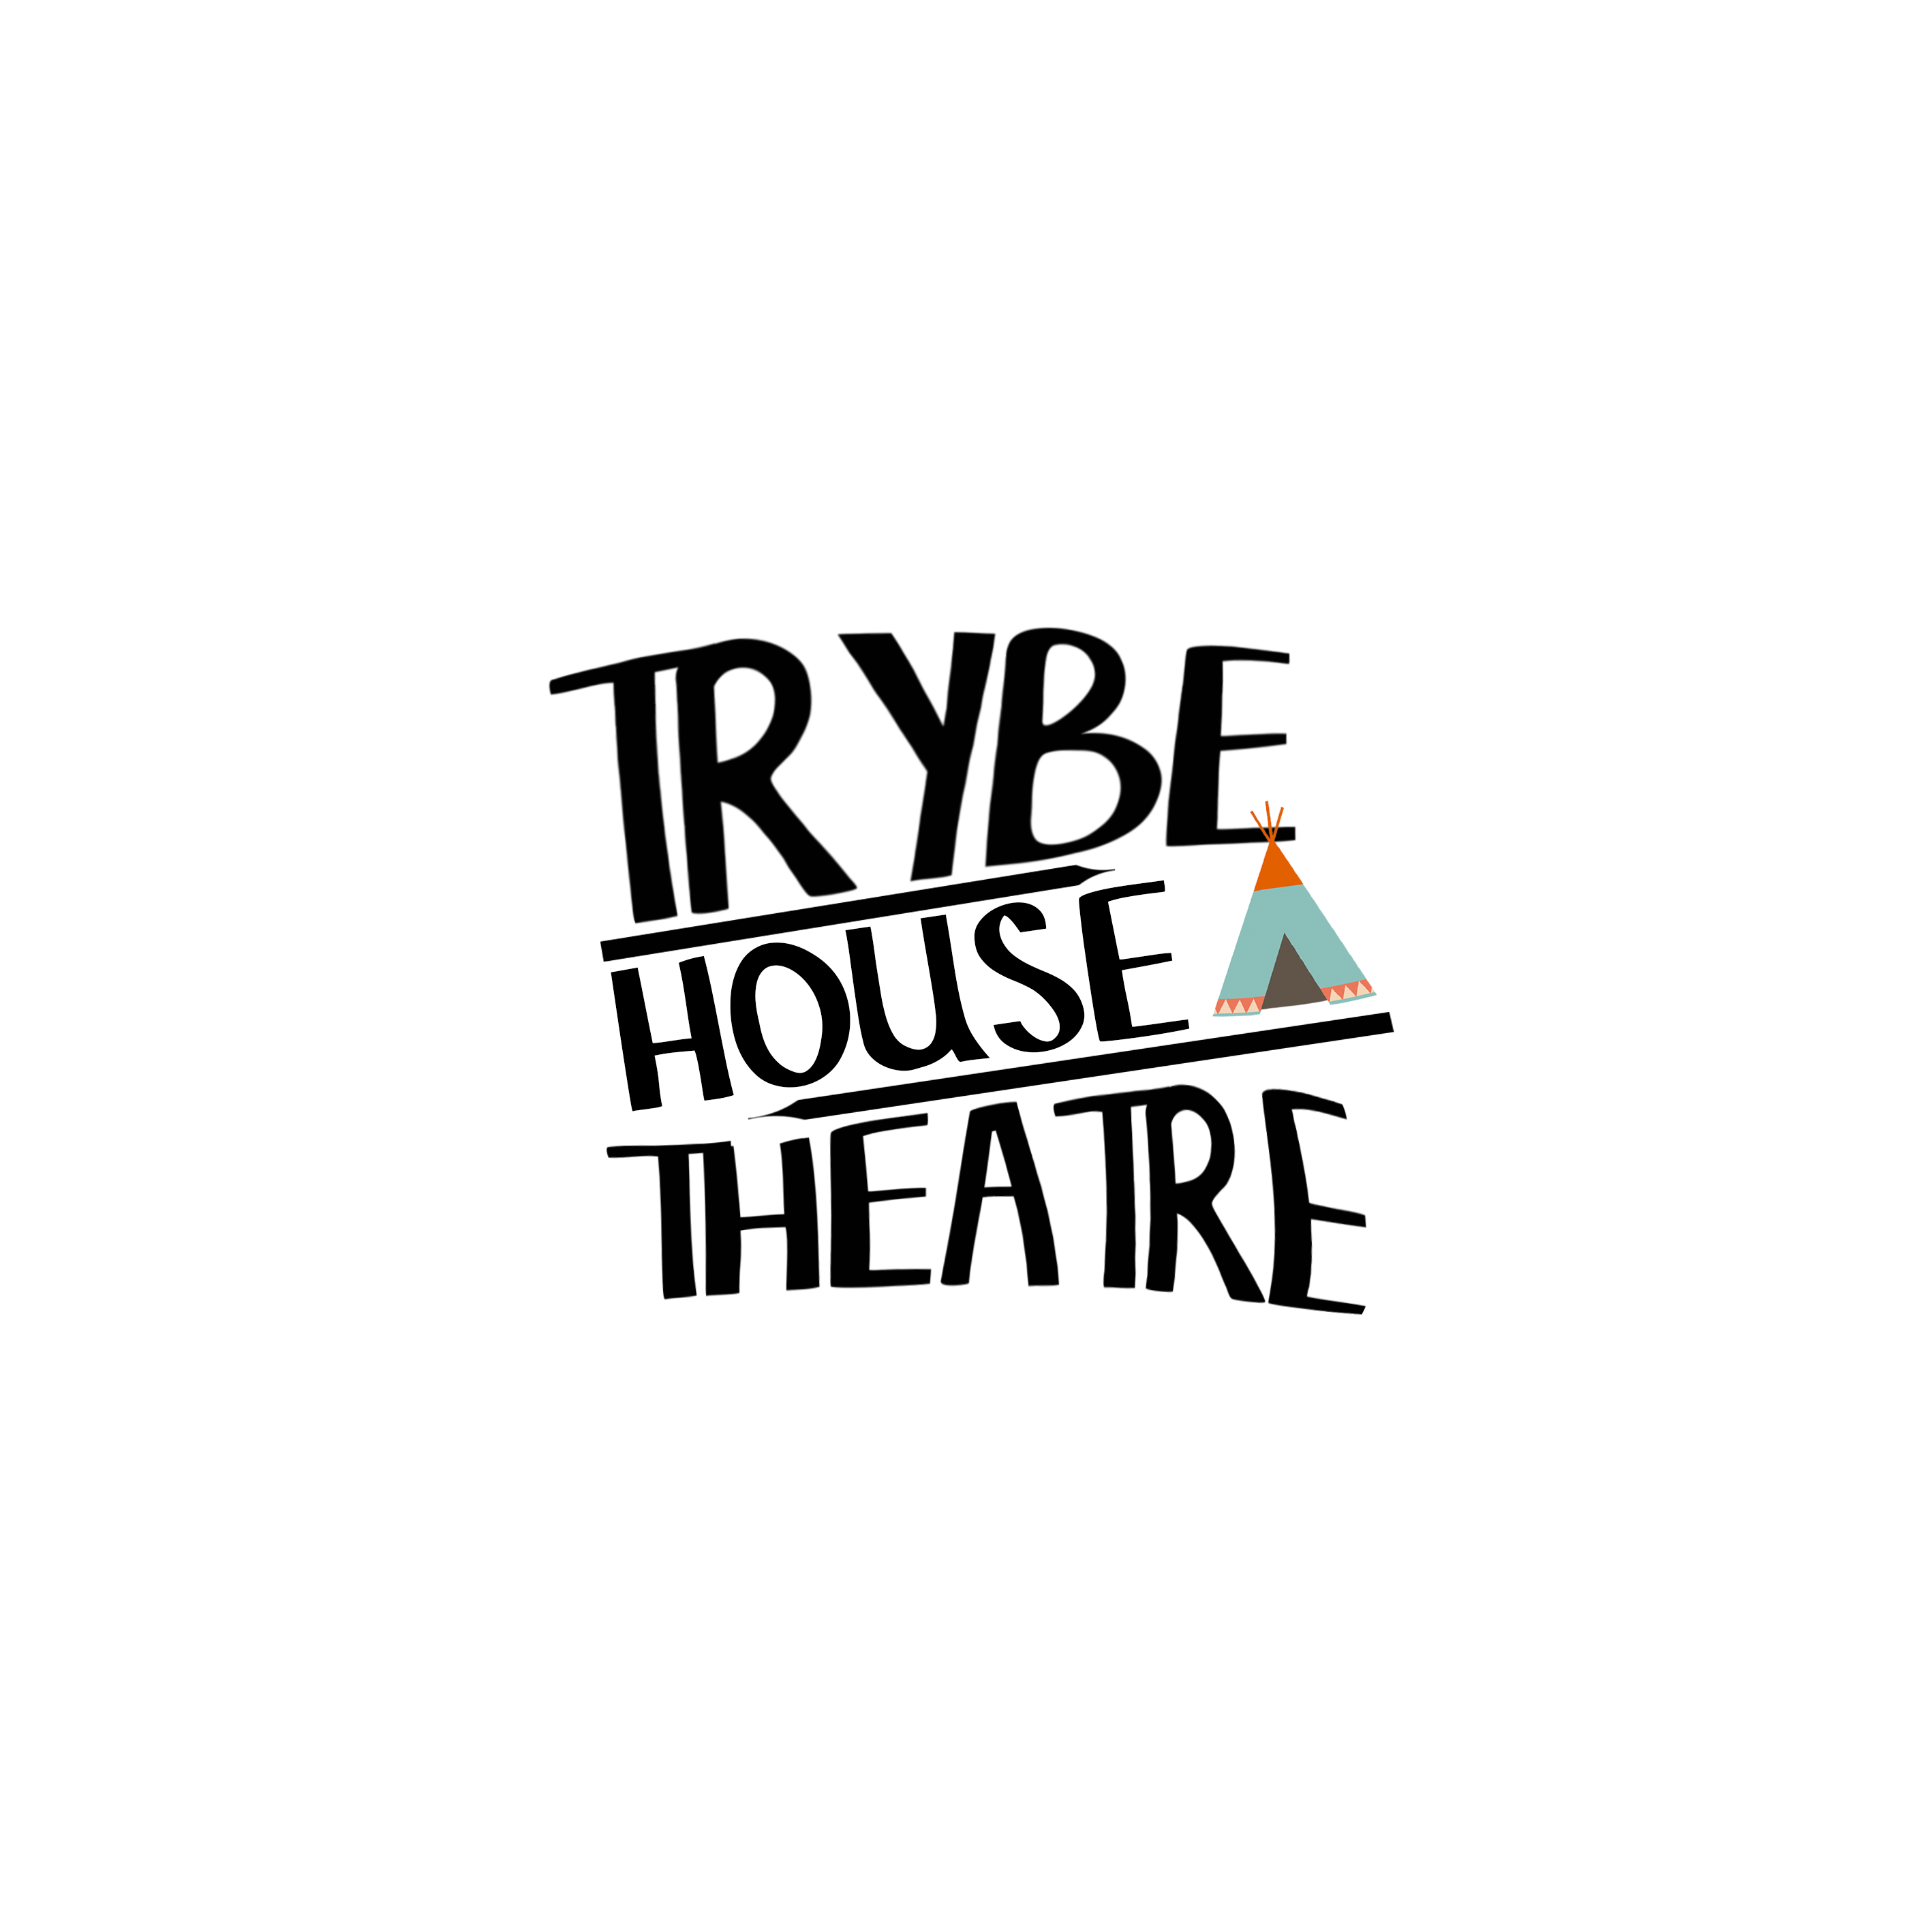 Trybe House Theatre